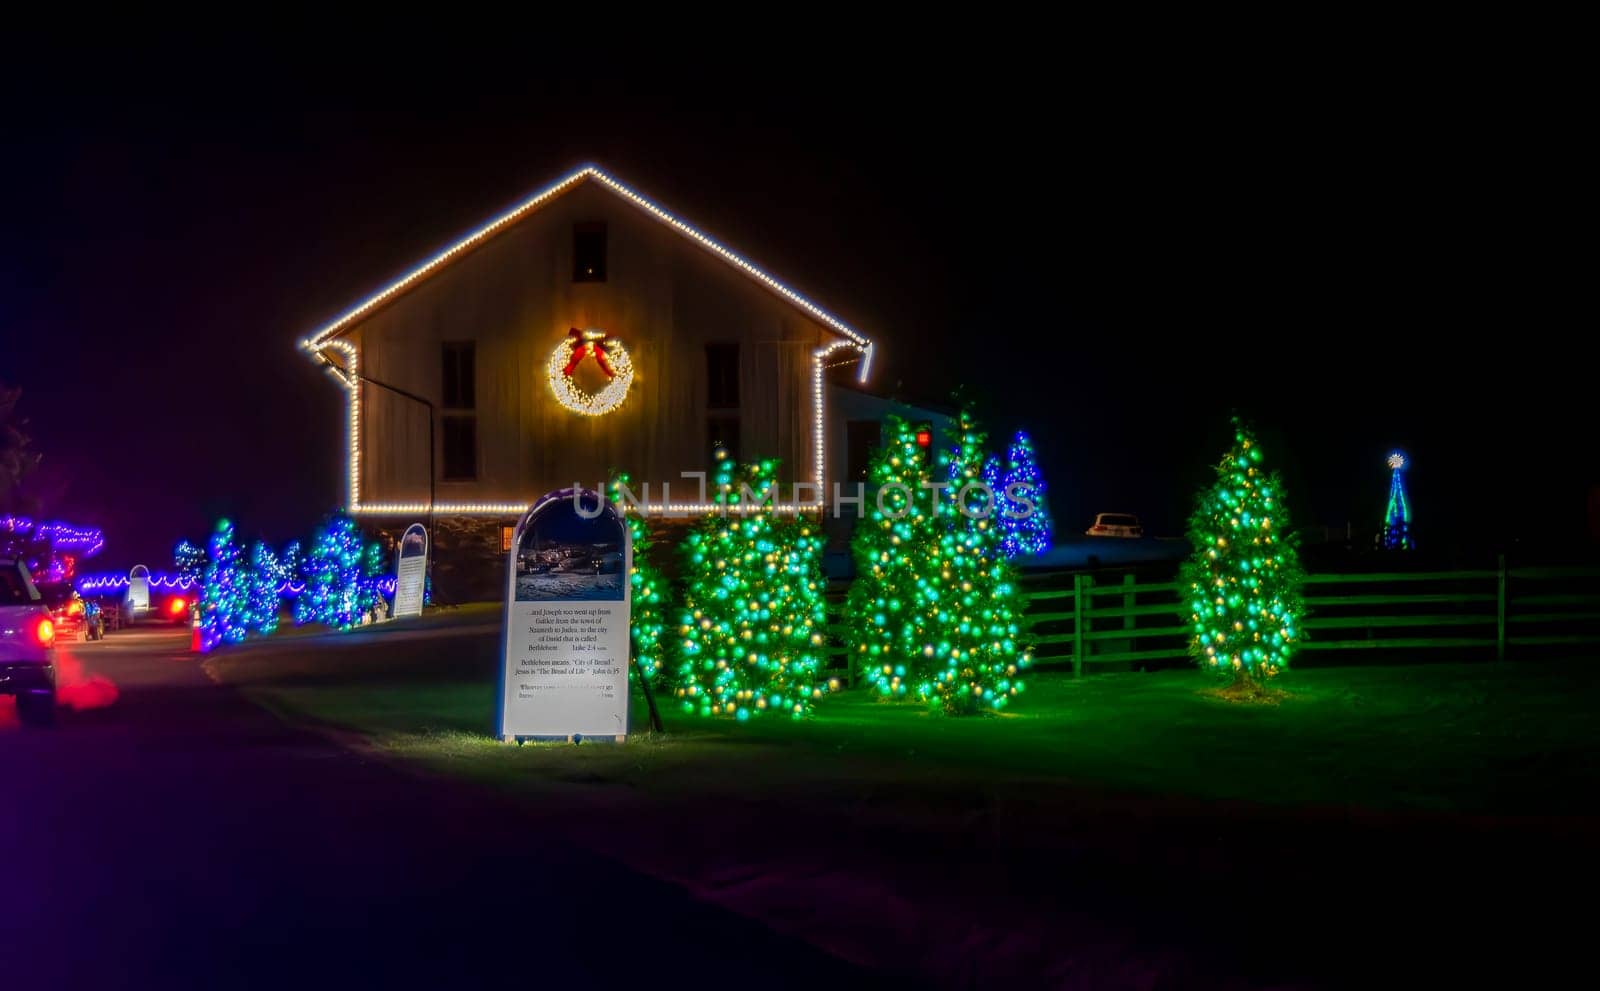 Festive Nighttime Scene Of A Building Outlined With White Christmas Lights And A Wreath, Surrounded By Trees Lit With Green Lights, Next To A Sign With Text And A Christmas Display.